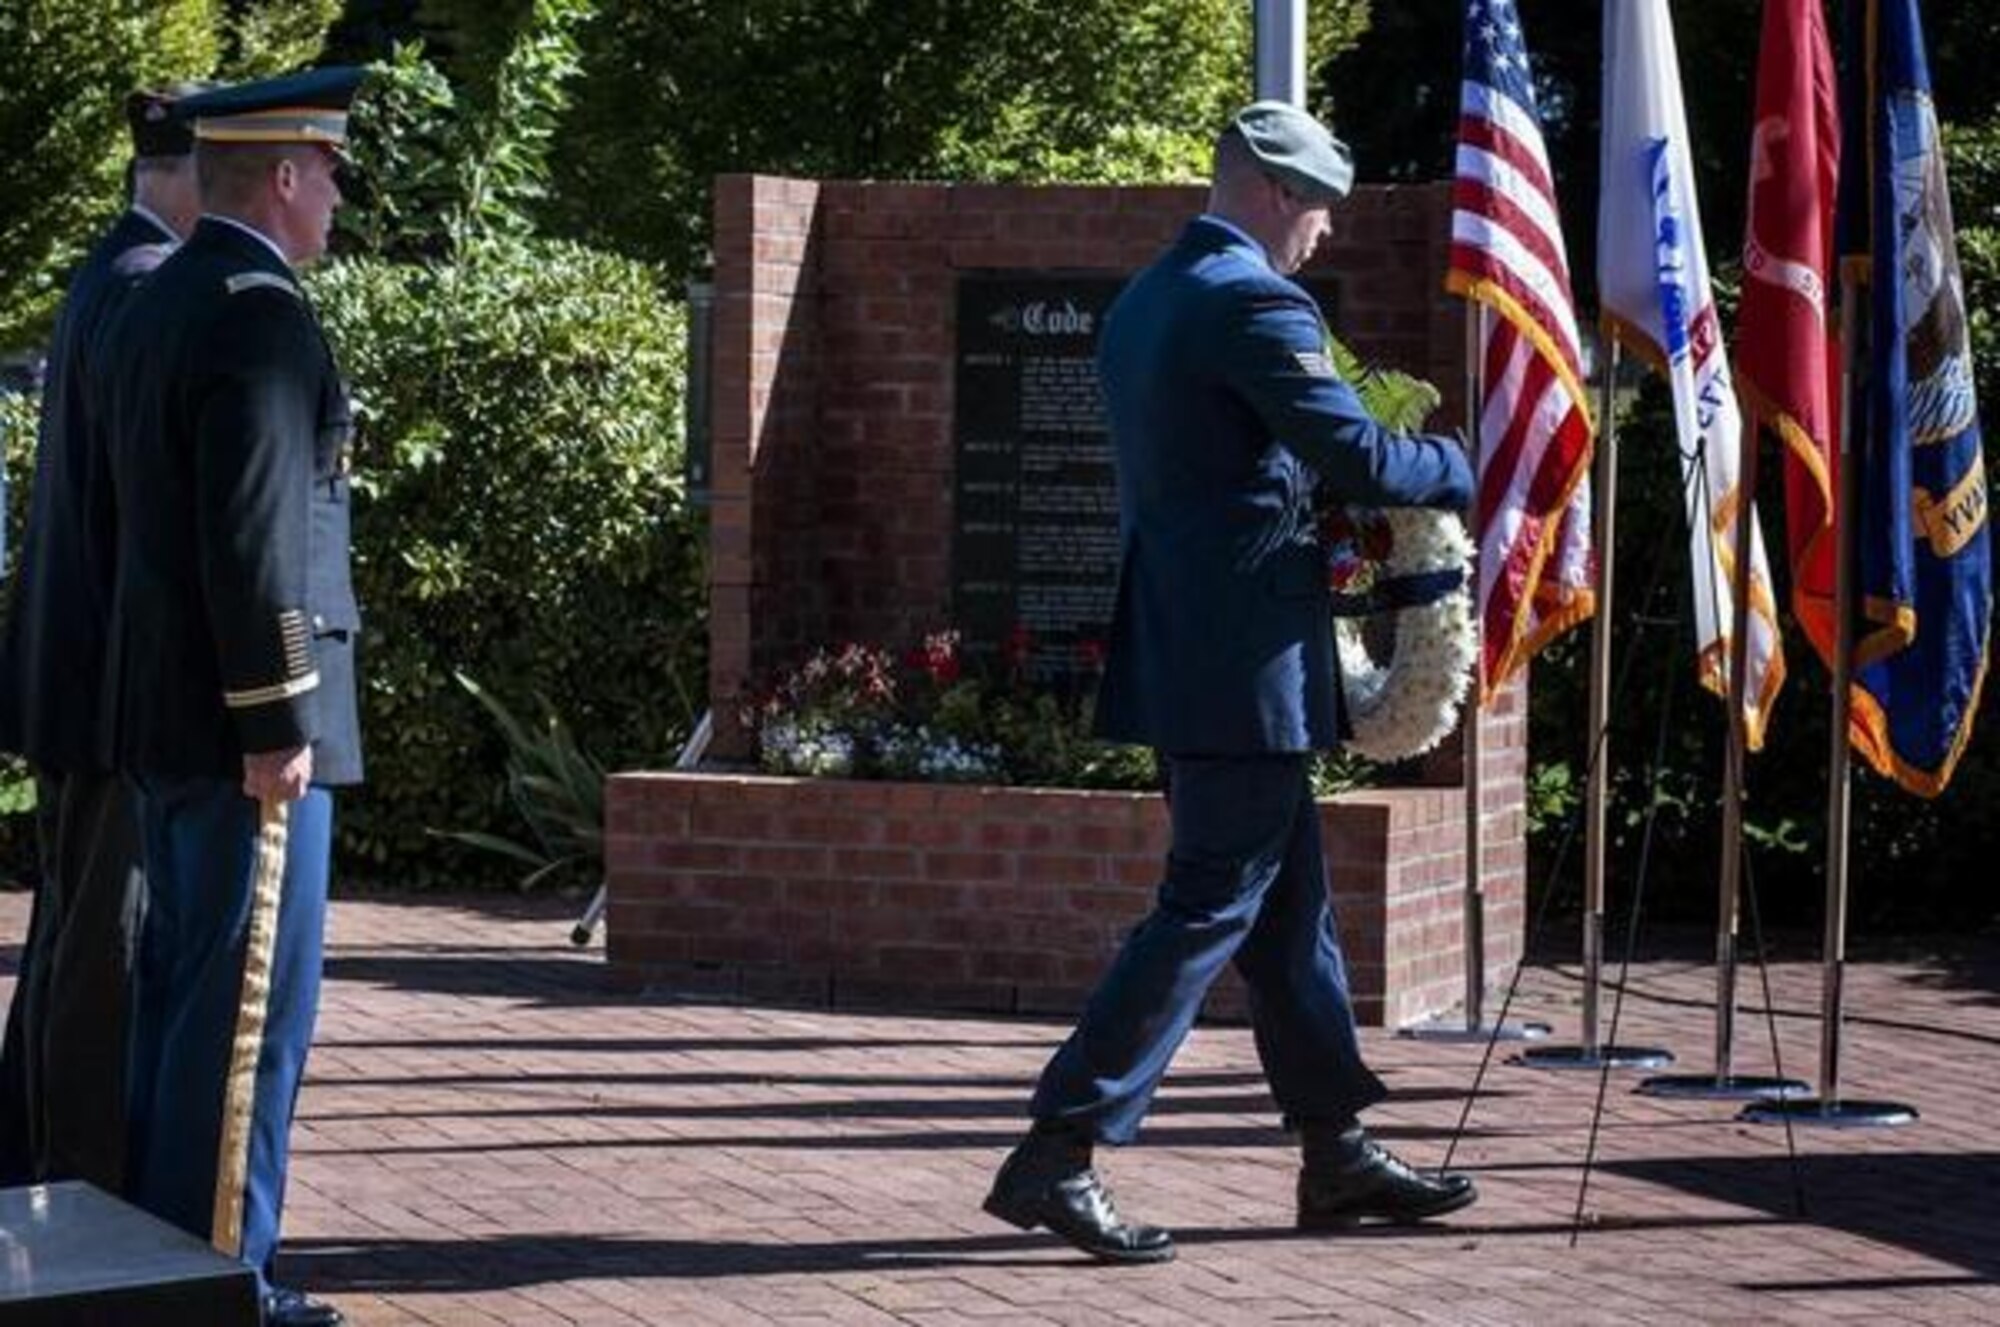 Staff Sgt. David Bowden, right, places a wreath during a POW/MIA Week observance at Memorial Grove Garden on McChord Field Sept. 12, 2016, at Joint Base Lewis-McChord, Wash.(Courtesy photo)   